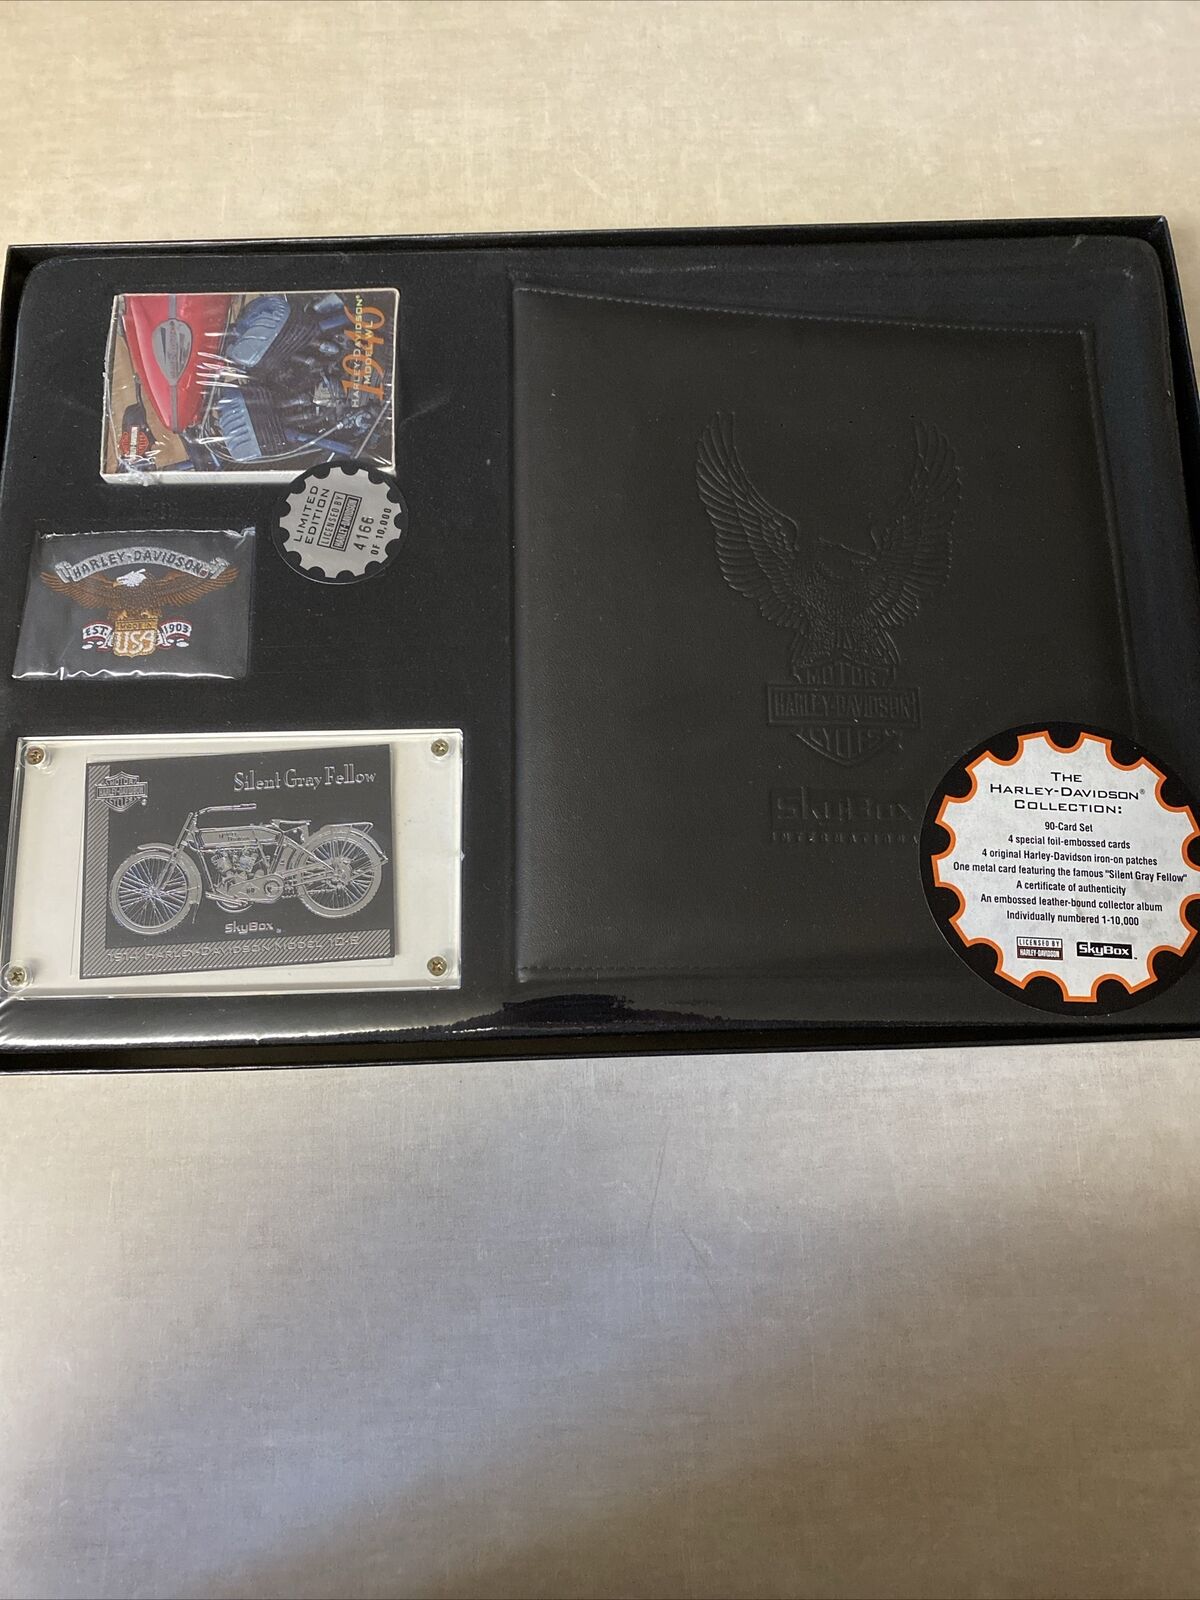 SKYBOX HARLEY DAVIDSON LIMITED EDITION COLLECTION FACTORY SEALED #4166 OF 10,000